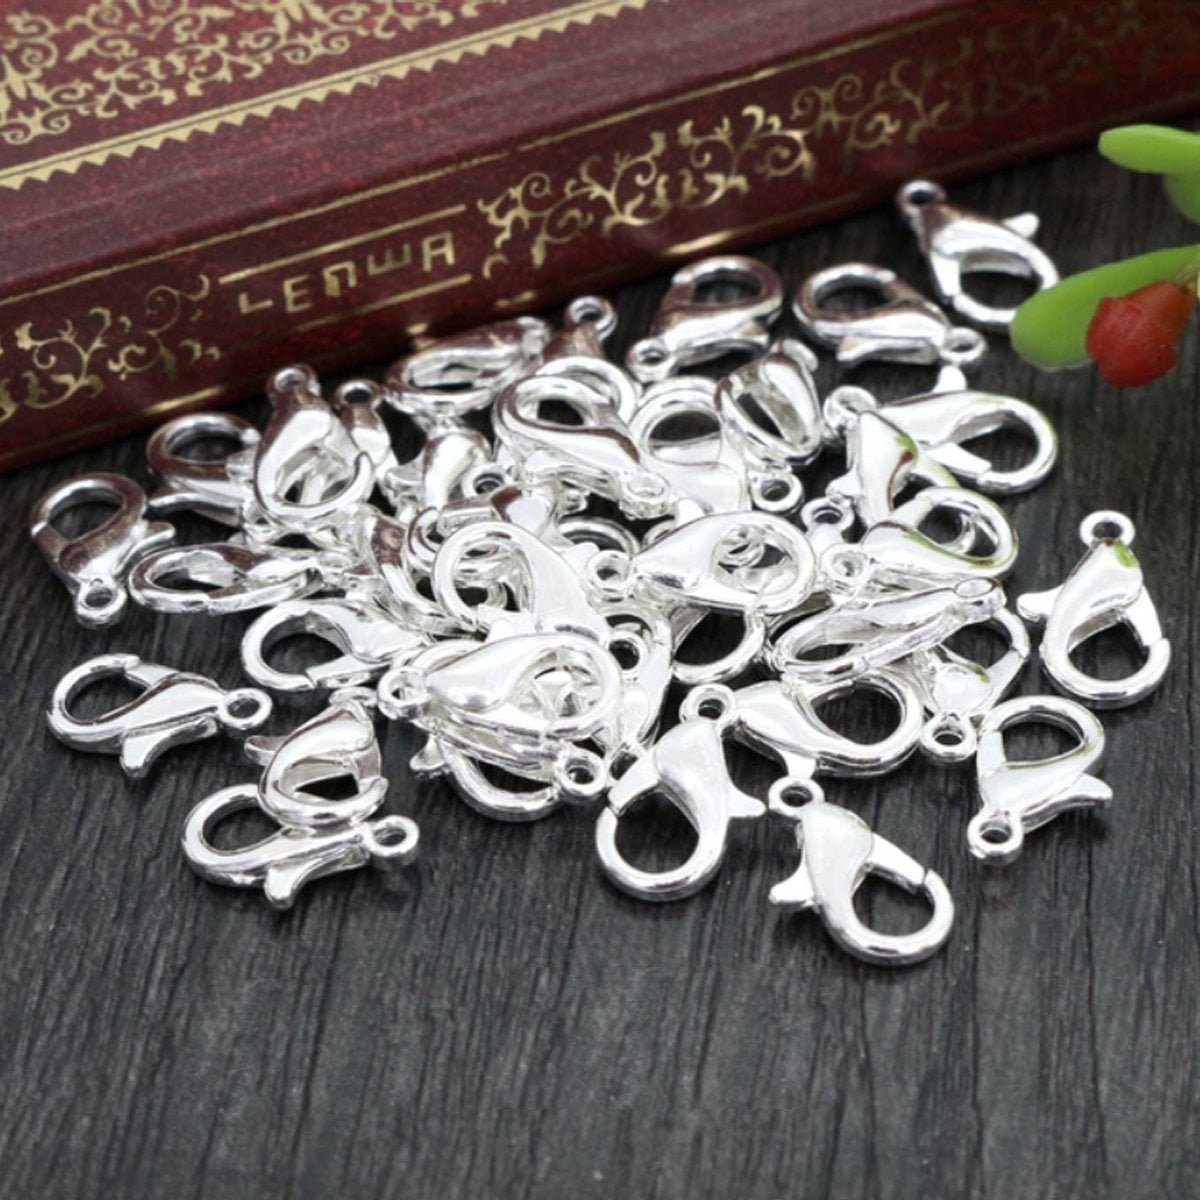 10pcs Plated Fashion Jewellery Alloy Lobster Clasp Hooks for Necklace & Bracelet Chain DIY Making Small Keyring - Silver 10x5mm - - Asia Sell